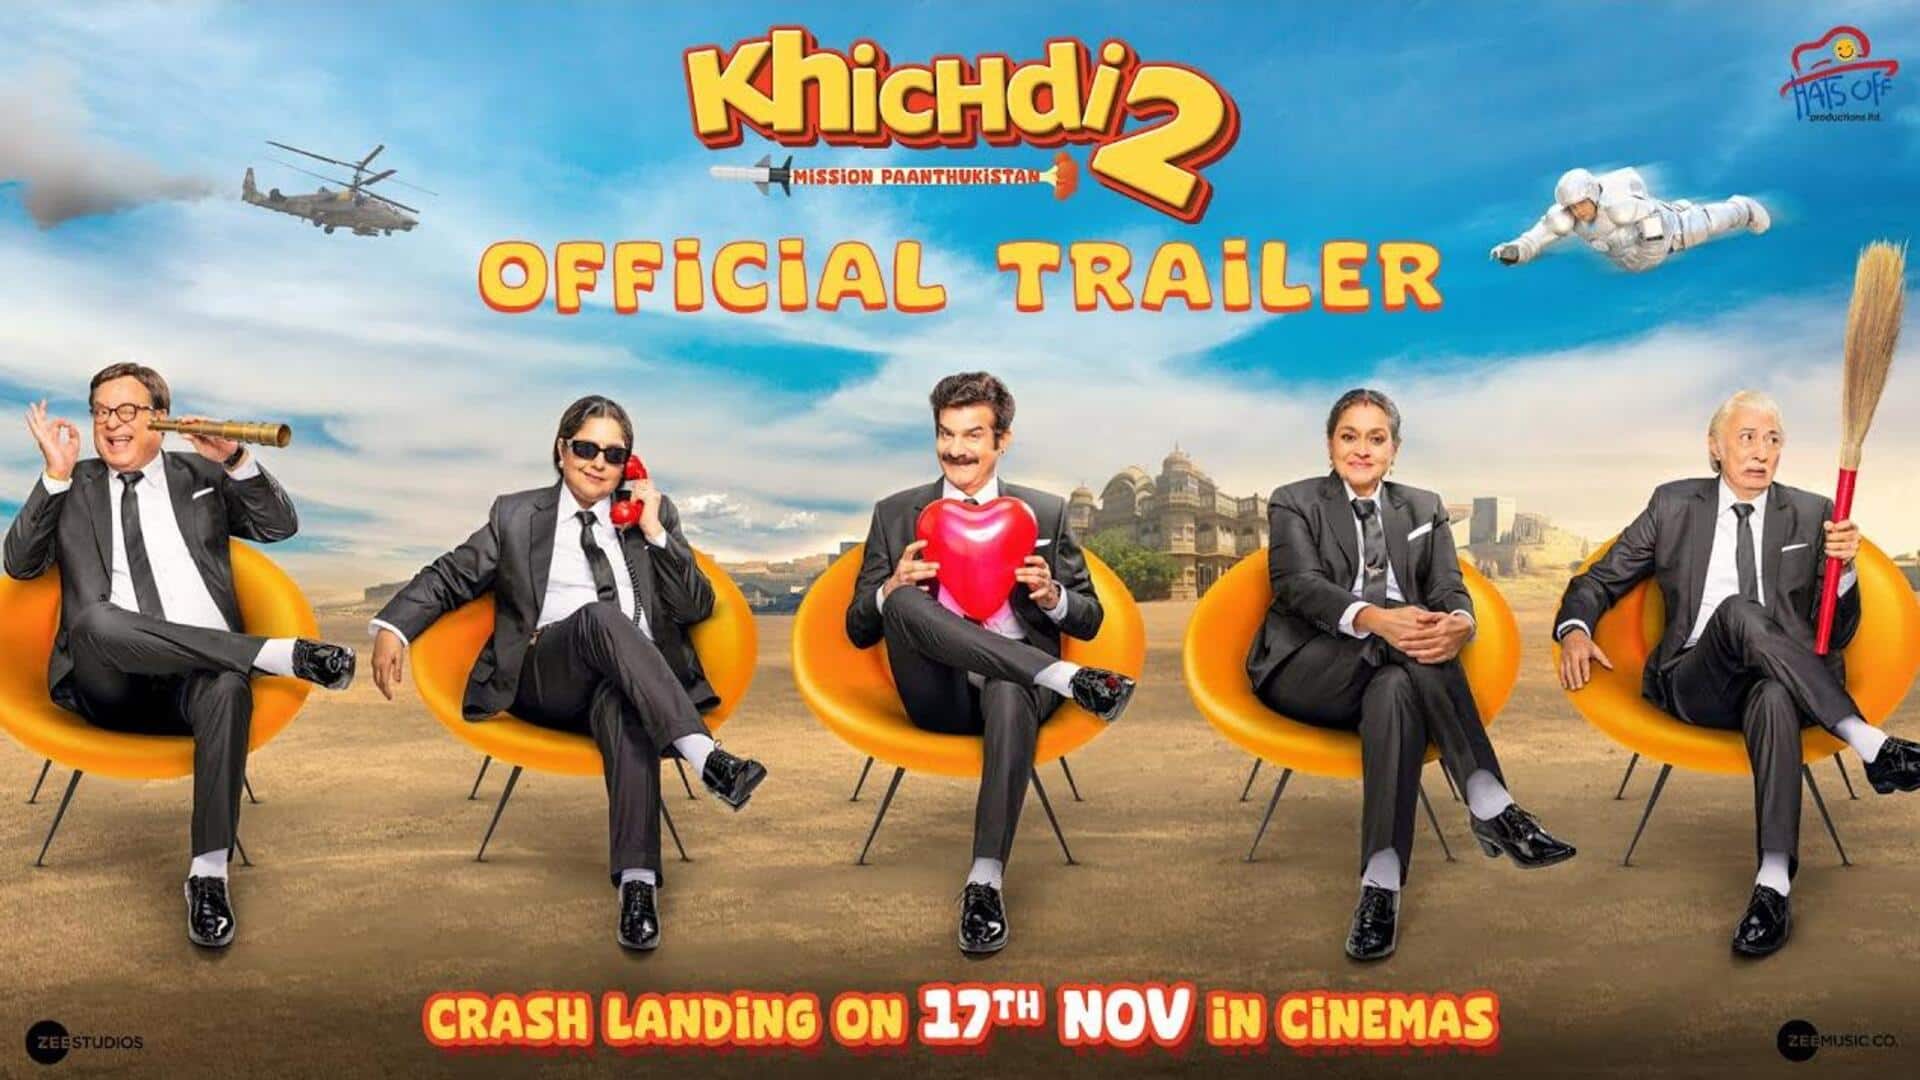 Box office collection: 'Khichdi 2' to exit theaters soon